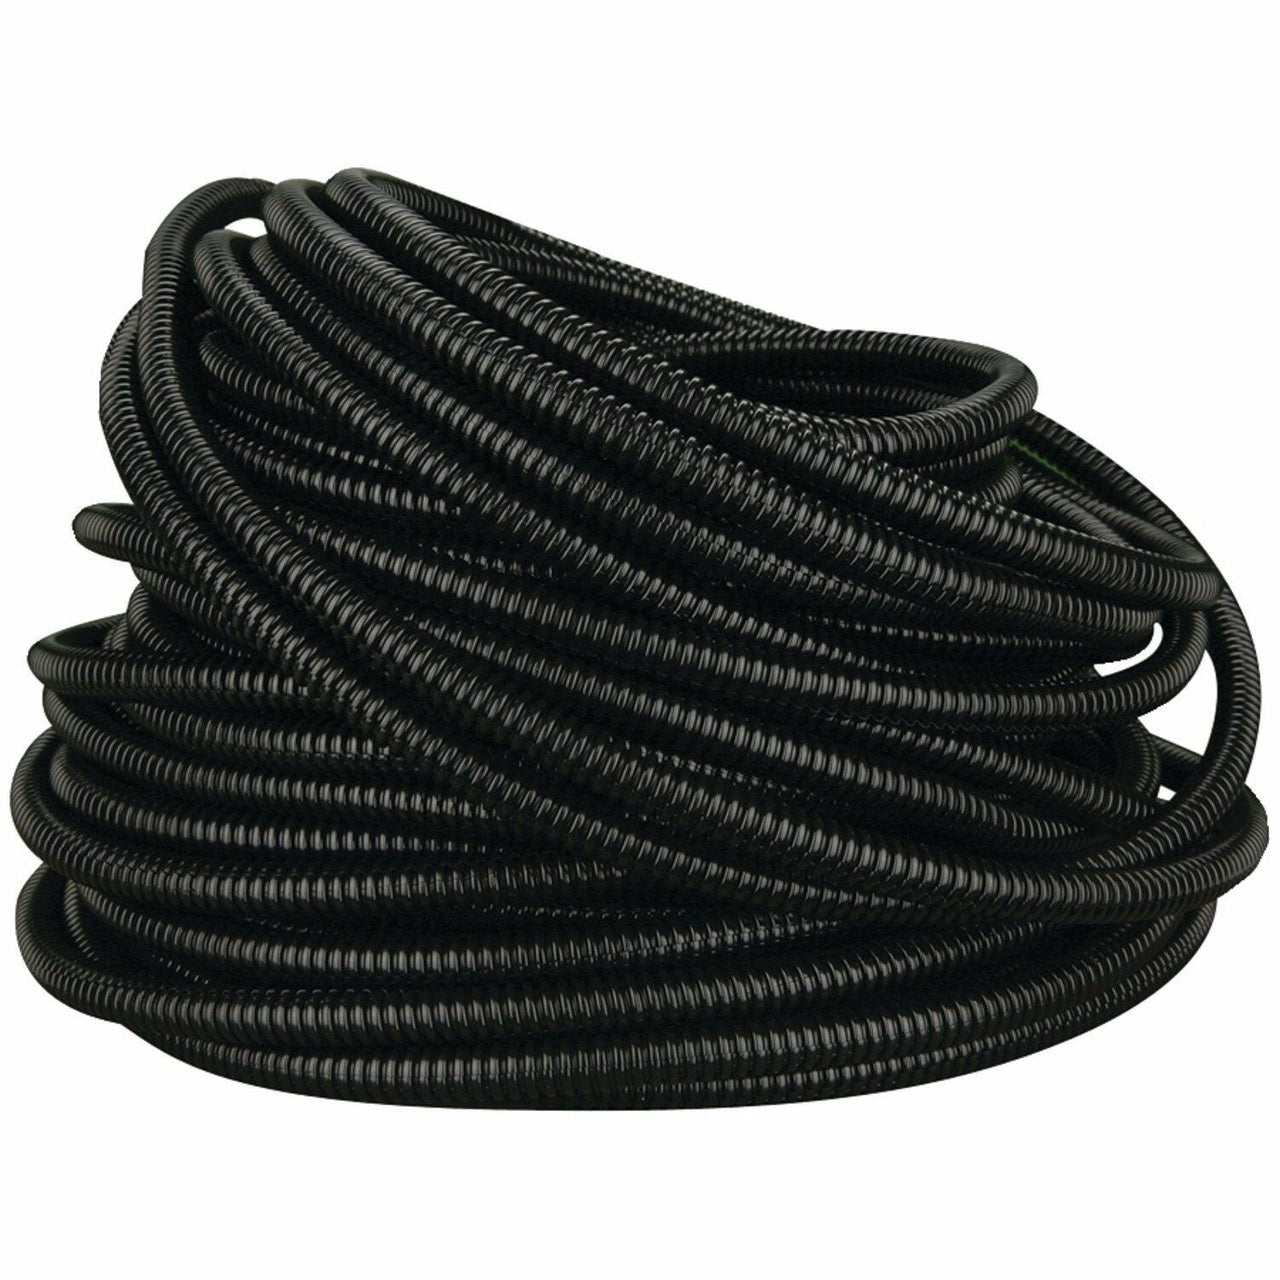 The Install Bay SLT14 100' <br/>high quality 1/4" split loom wire tubing 100 feet in black ribbed design